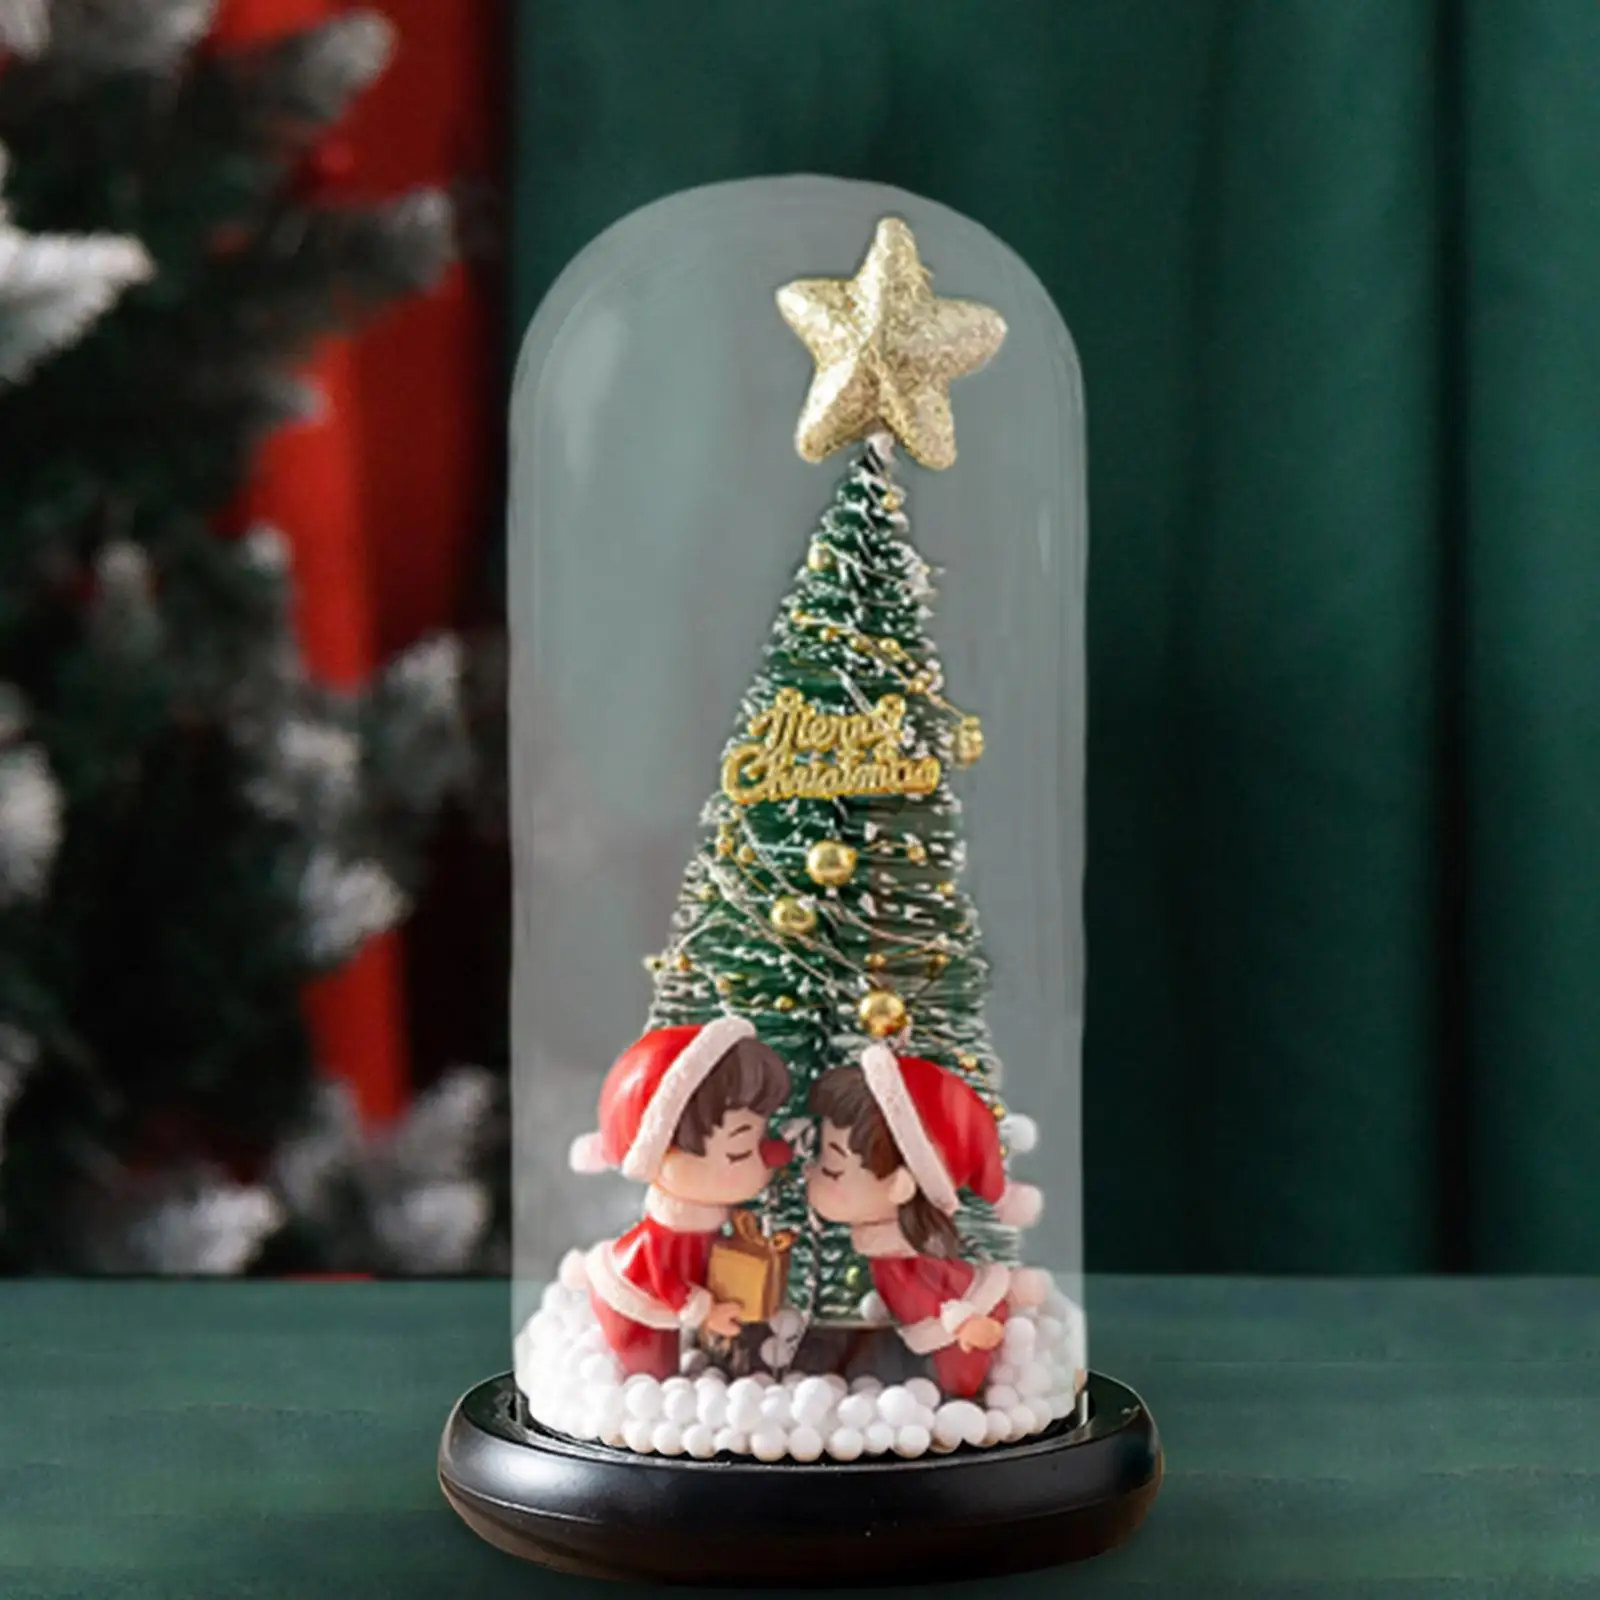 Tabletop Mini Christmas Tree with LED Decorative Simulation Christmas Ornament Crafts for Office Indoor Festival Shelf Desktop